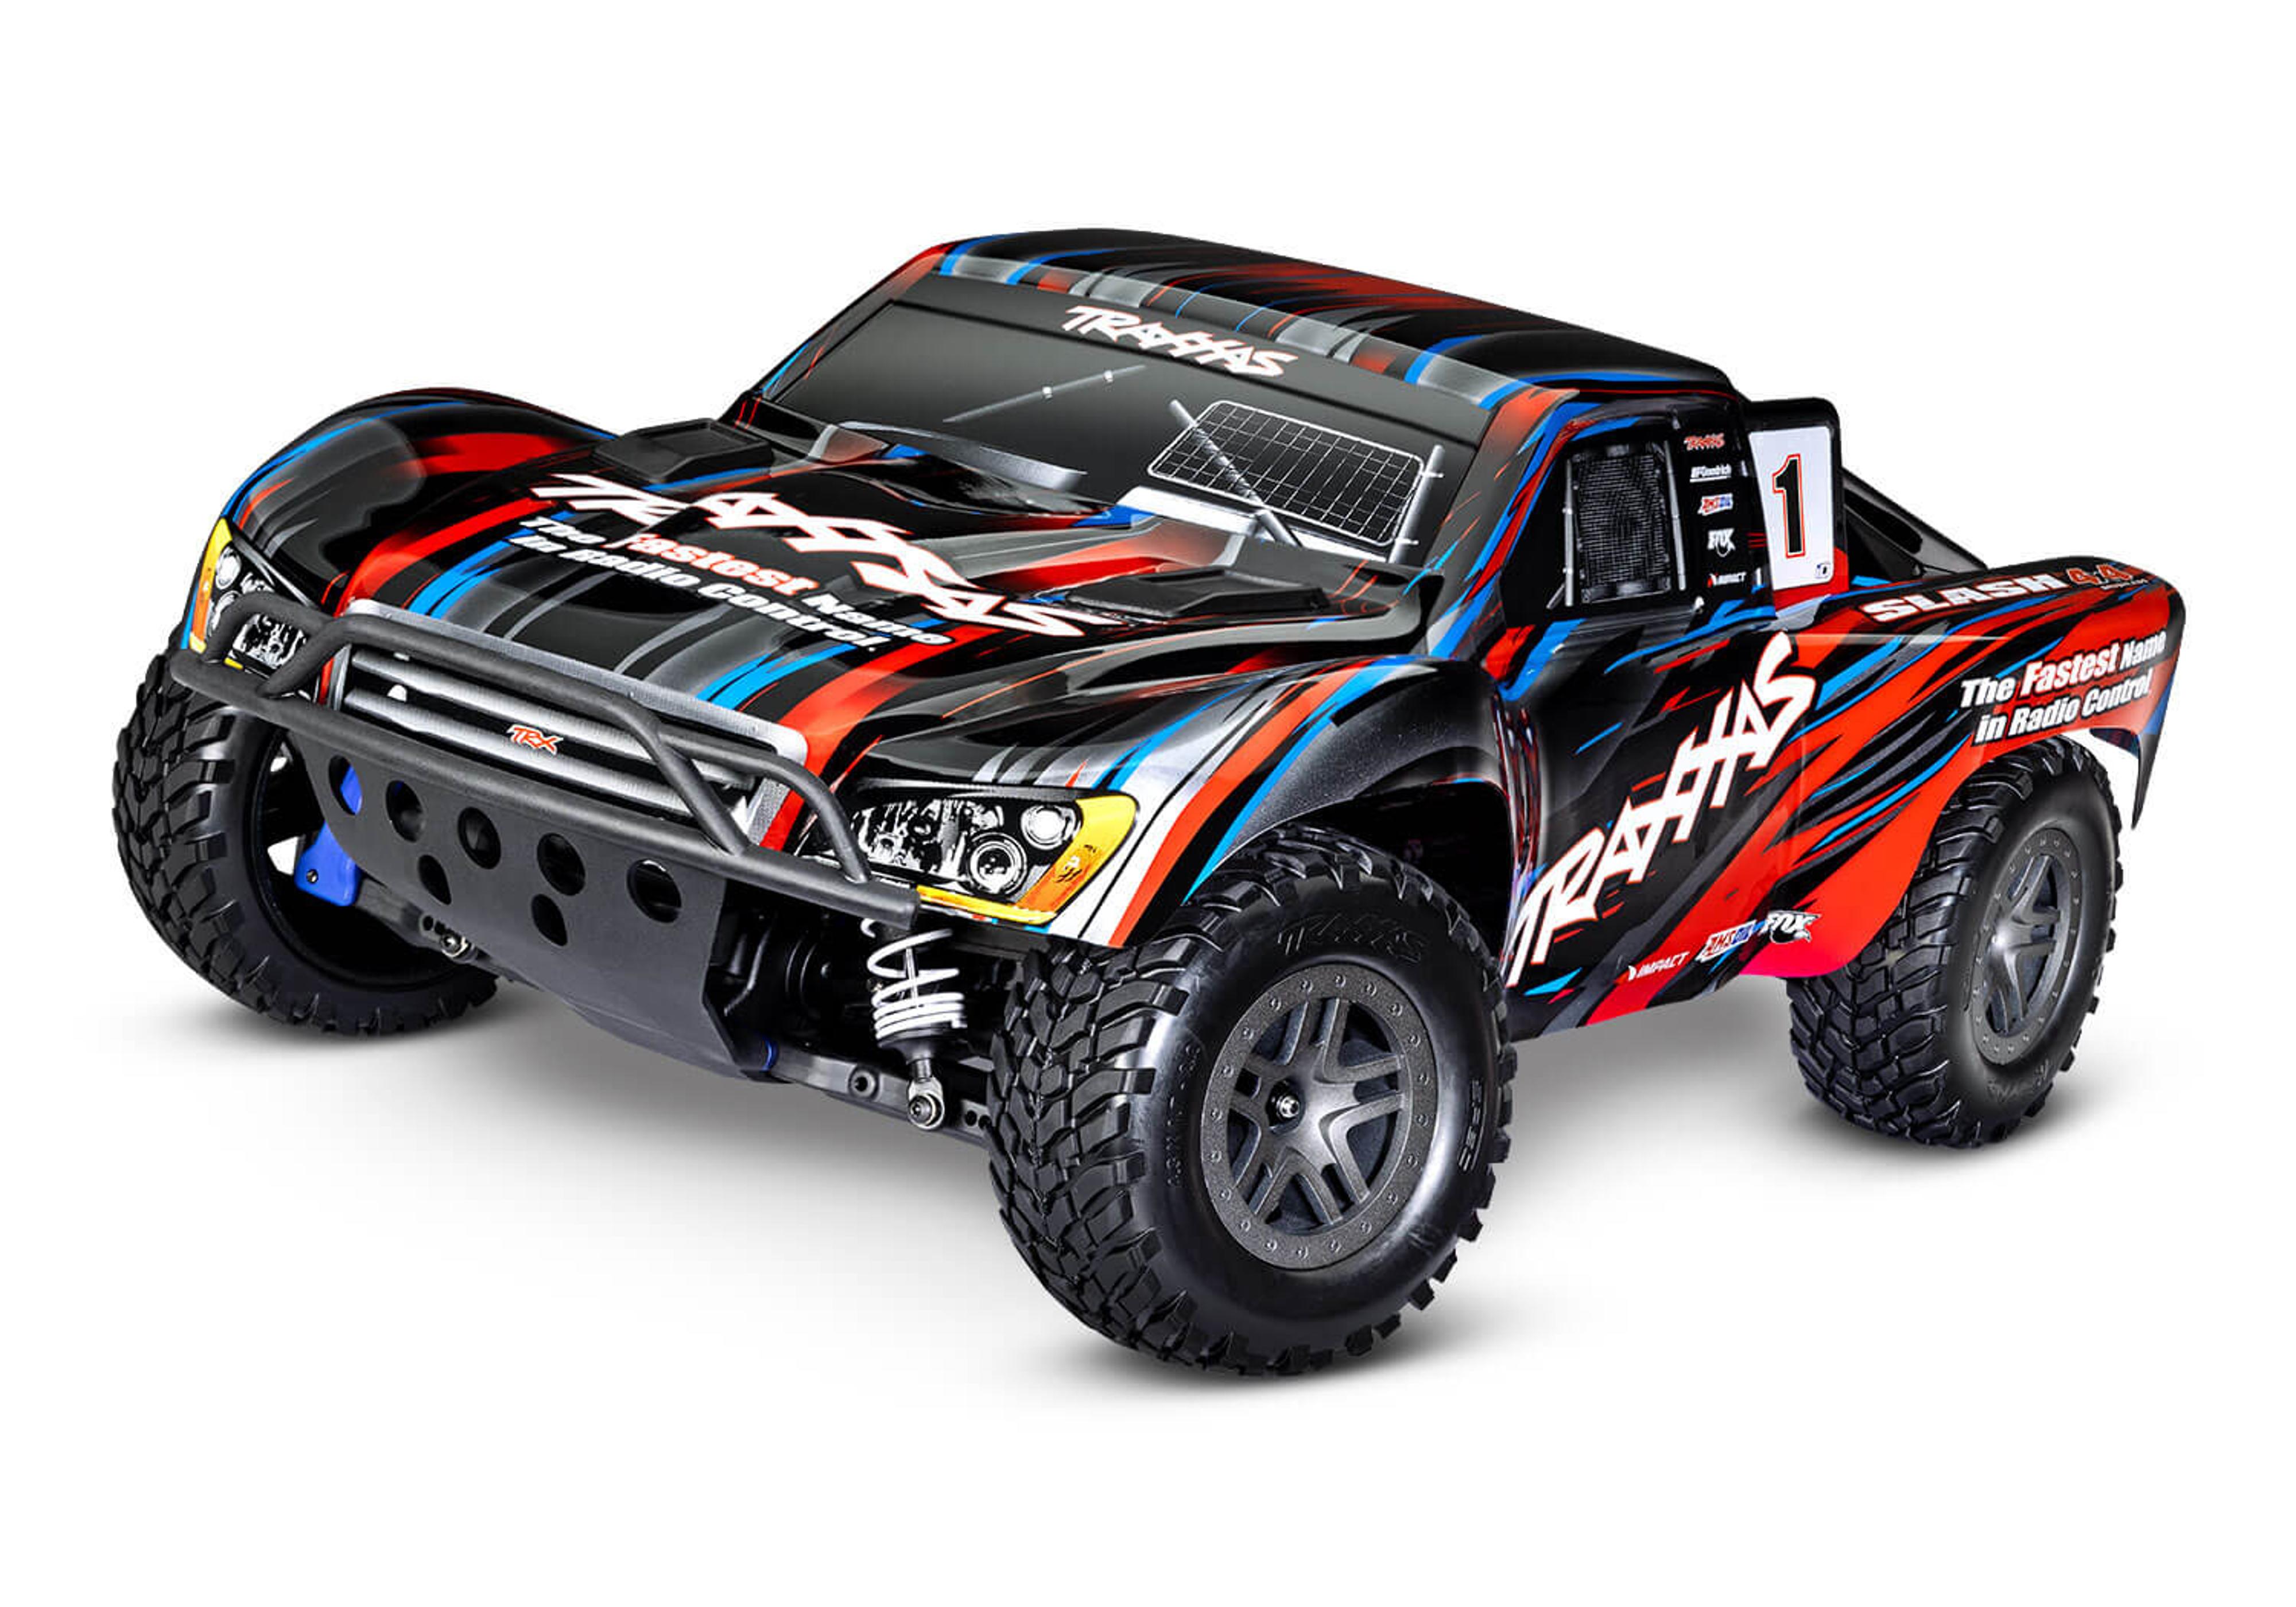 Slash 4x4 BL-2s Shourt Course 4WD Off-Road Truck RTR R/C (Red)